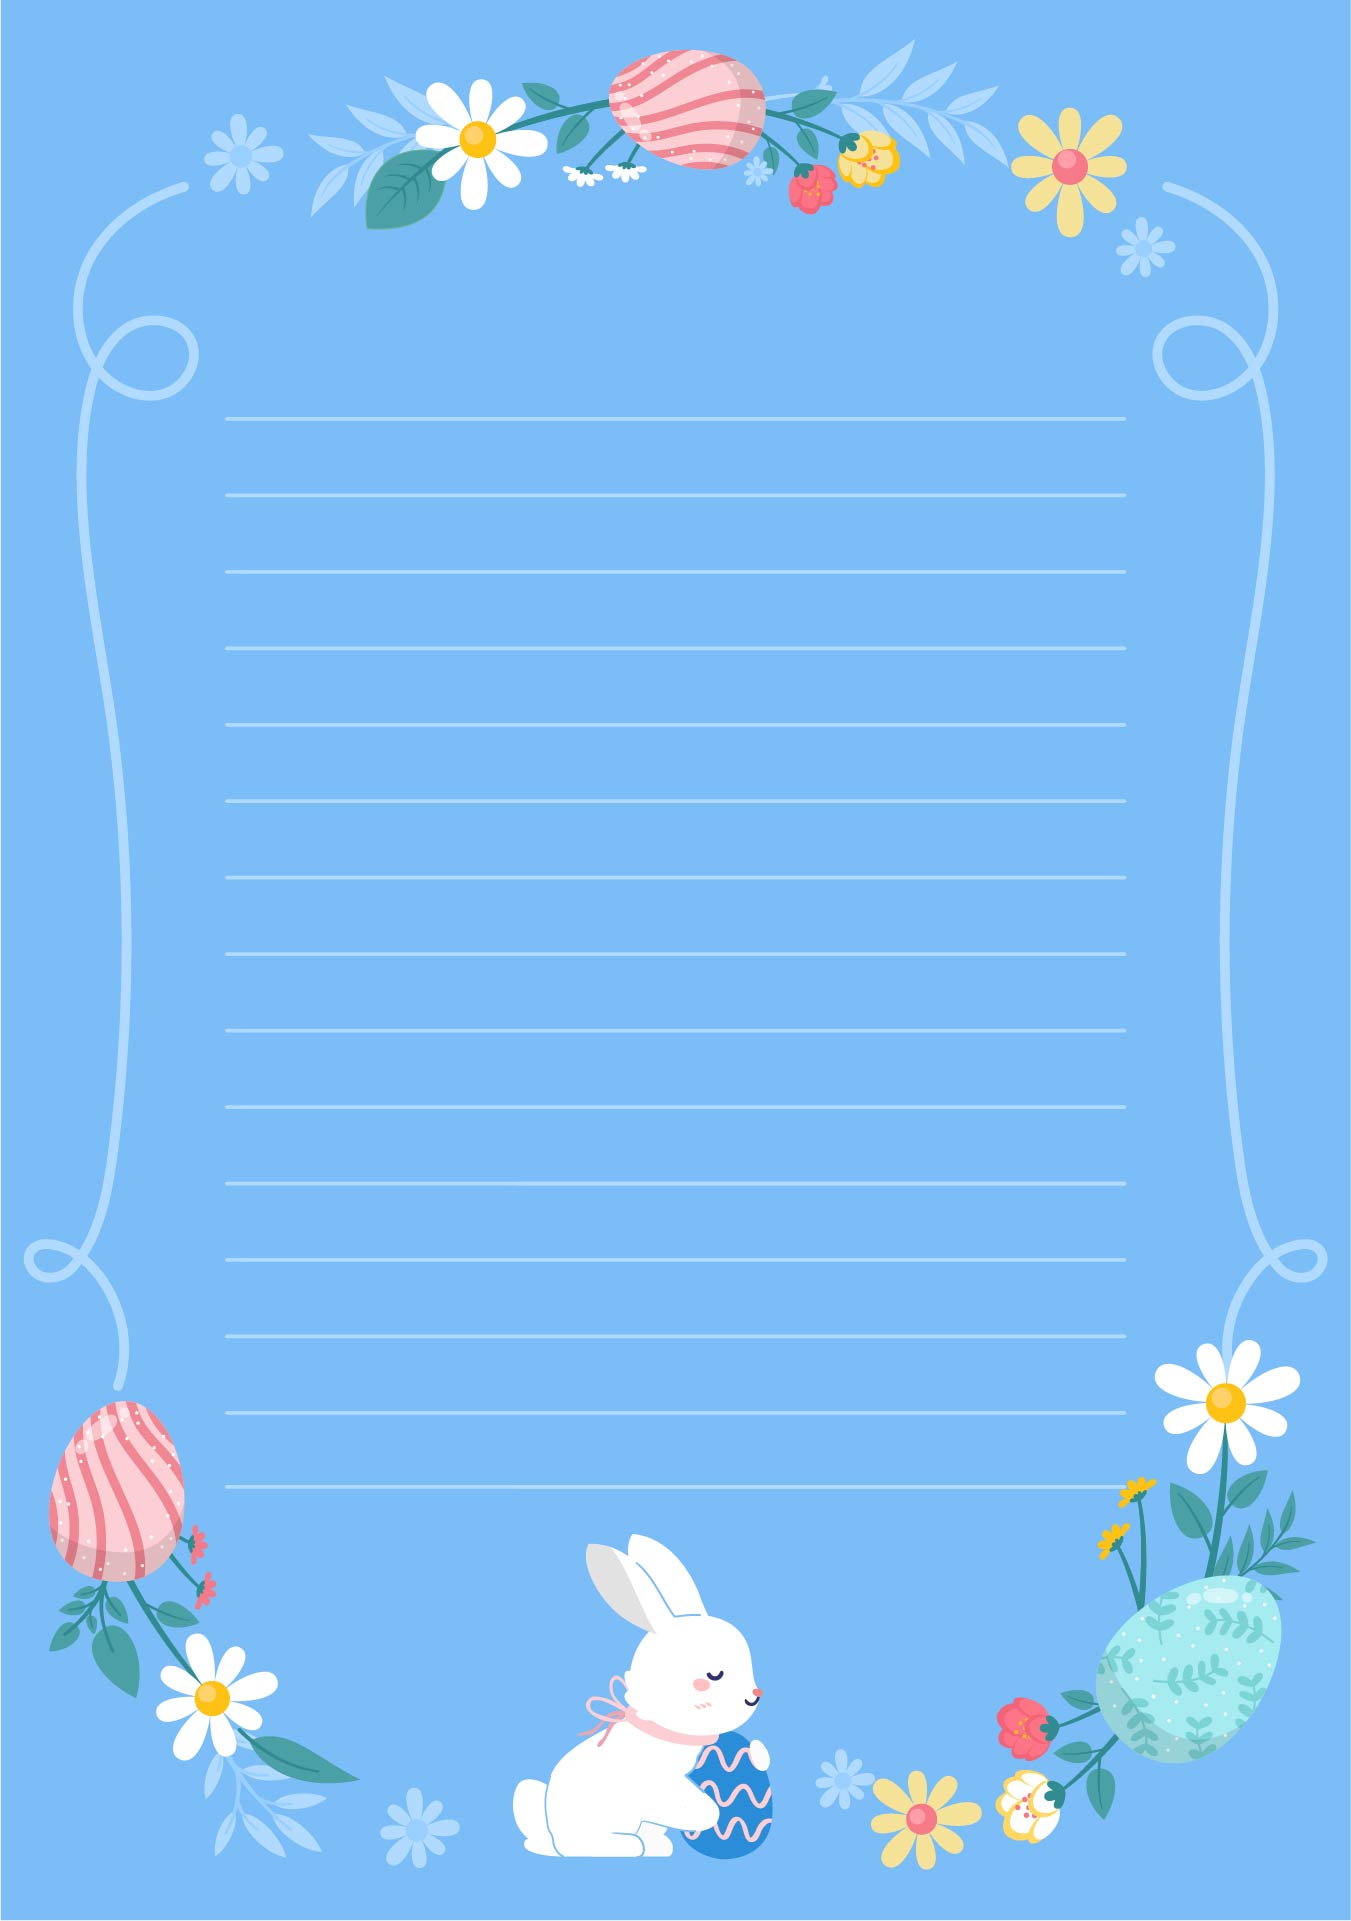 Printable Easter Stationery Borders